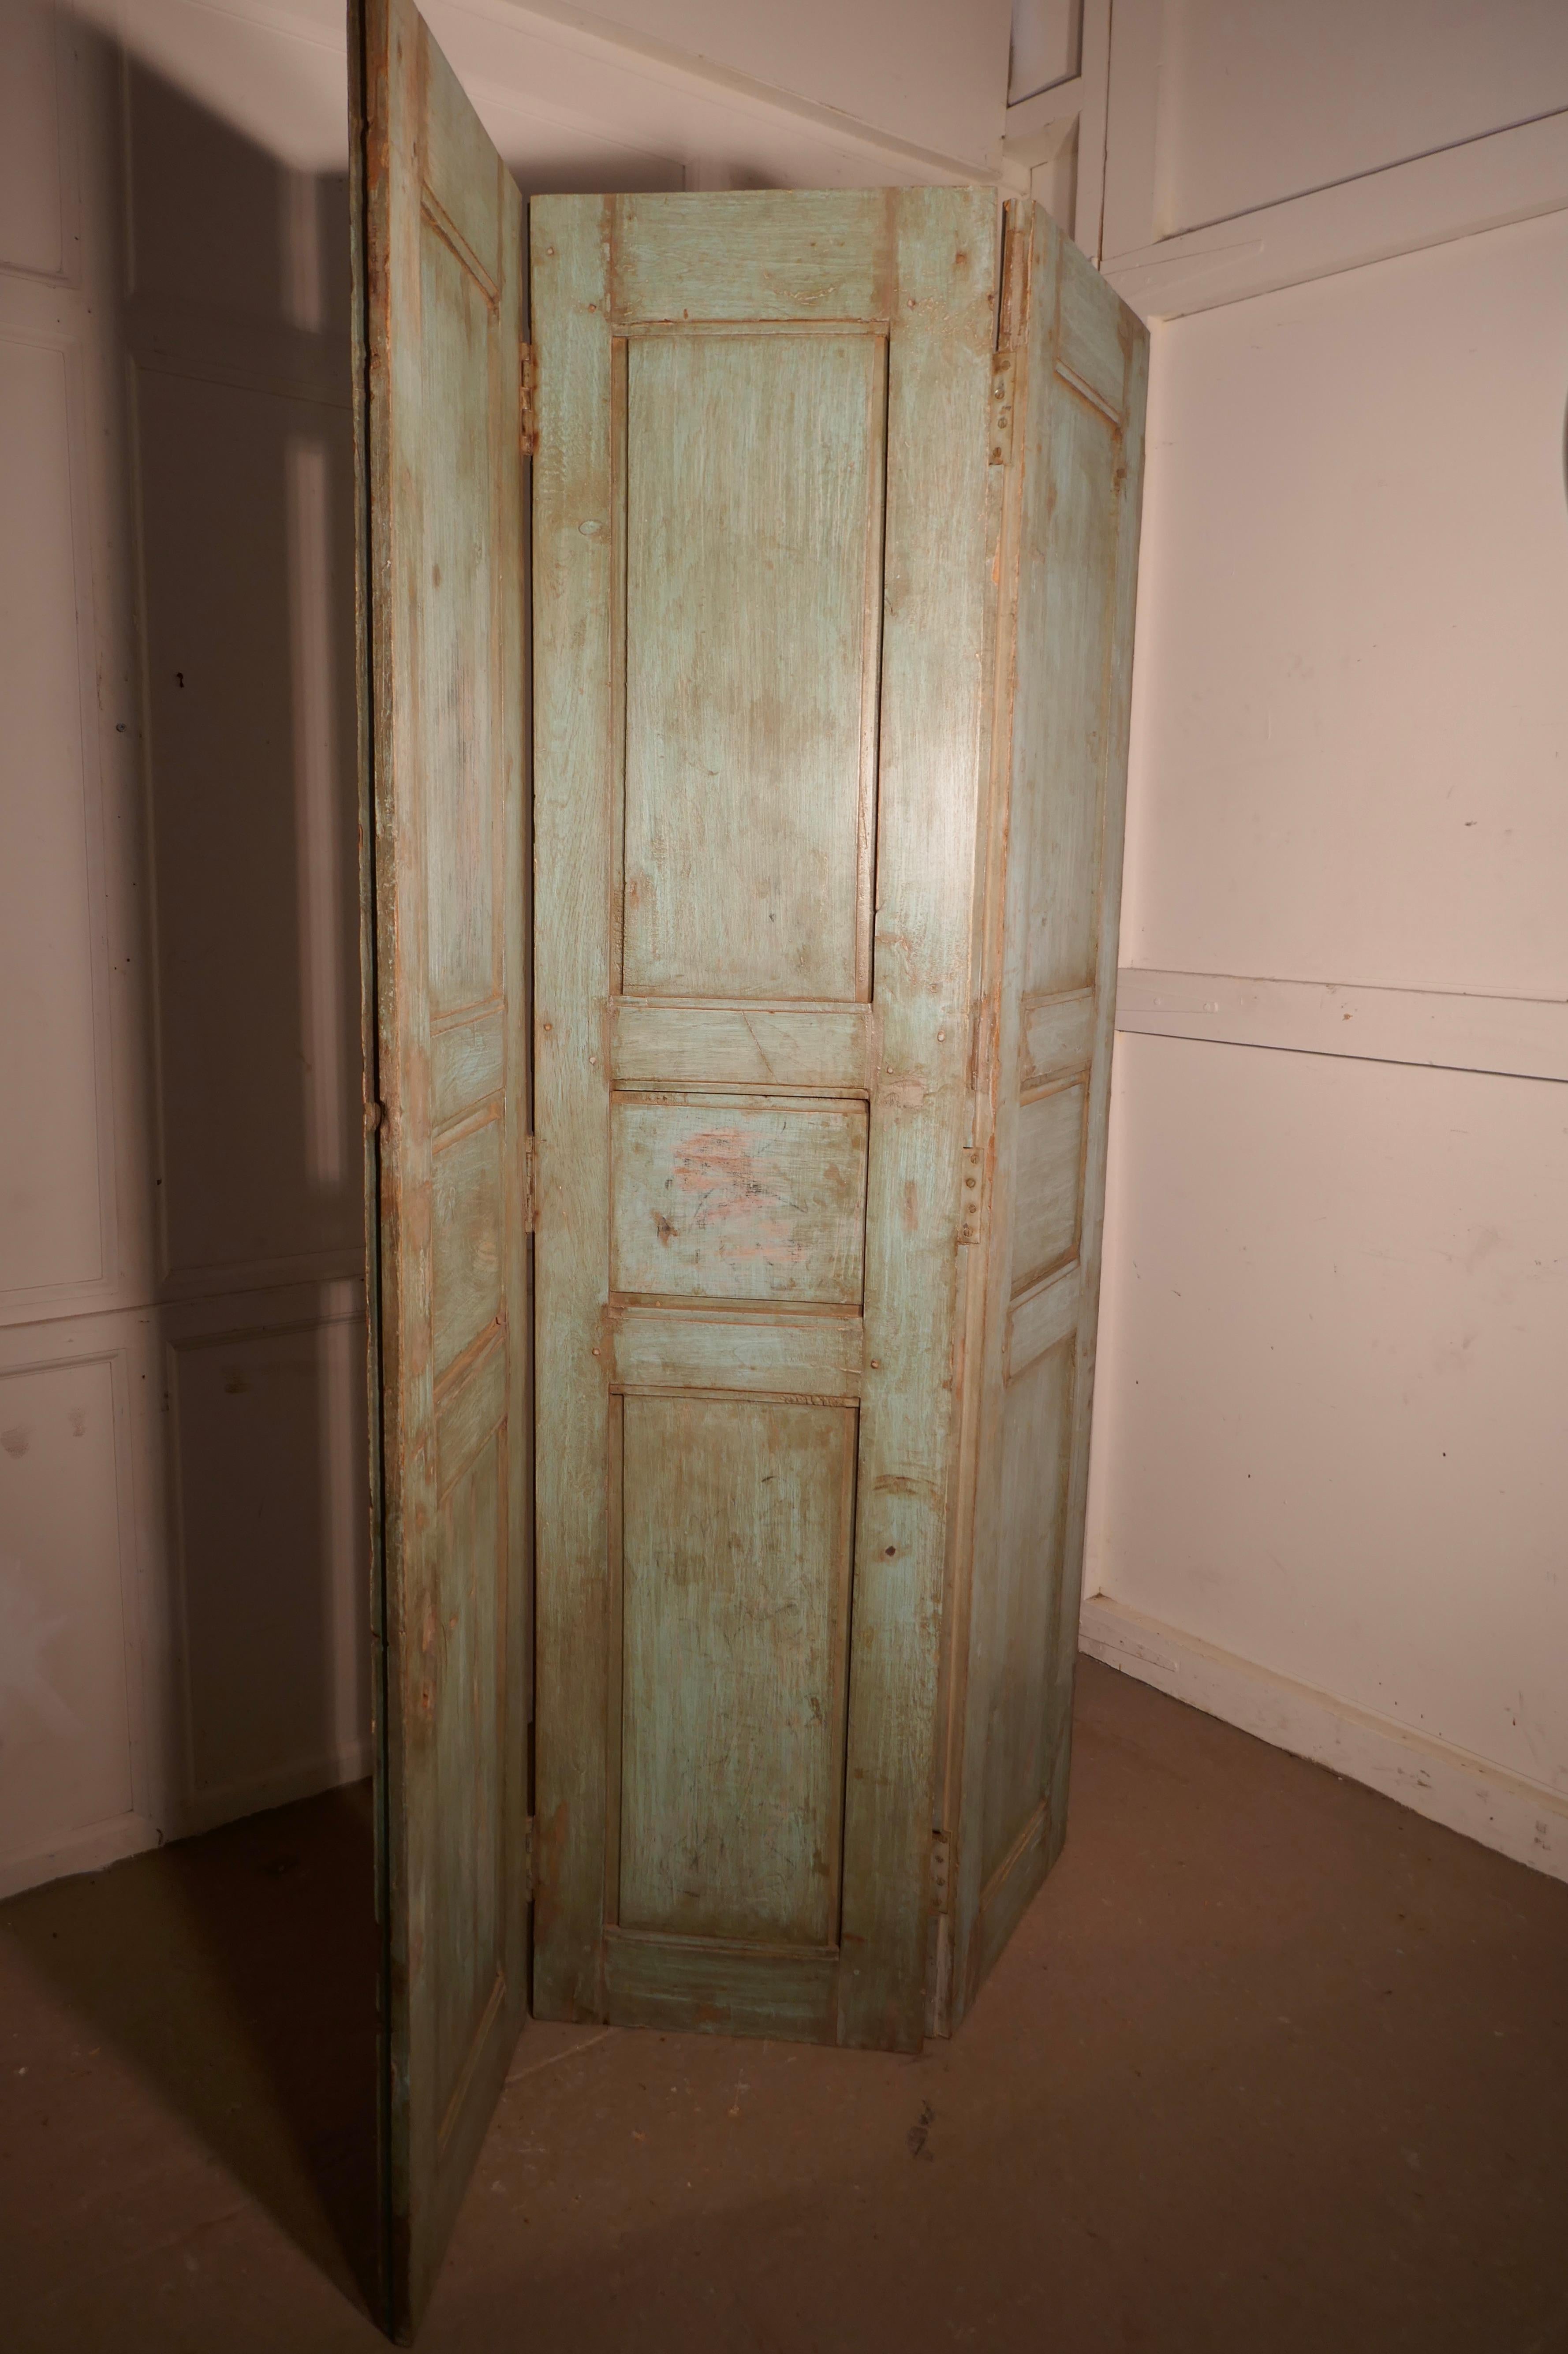 Heavy 19th century painted French window shutter 3 fold screen, room divider

This is a very heavy piece, the screen is 3 hard wood shutters which are in their original distressed paint, on a light blue green shade
The room divider has 3 panelled